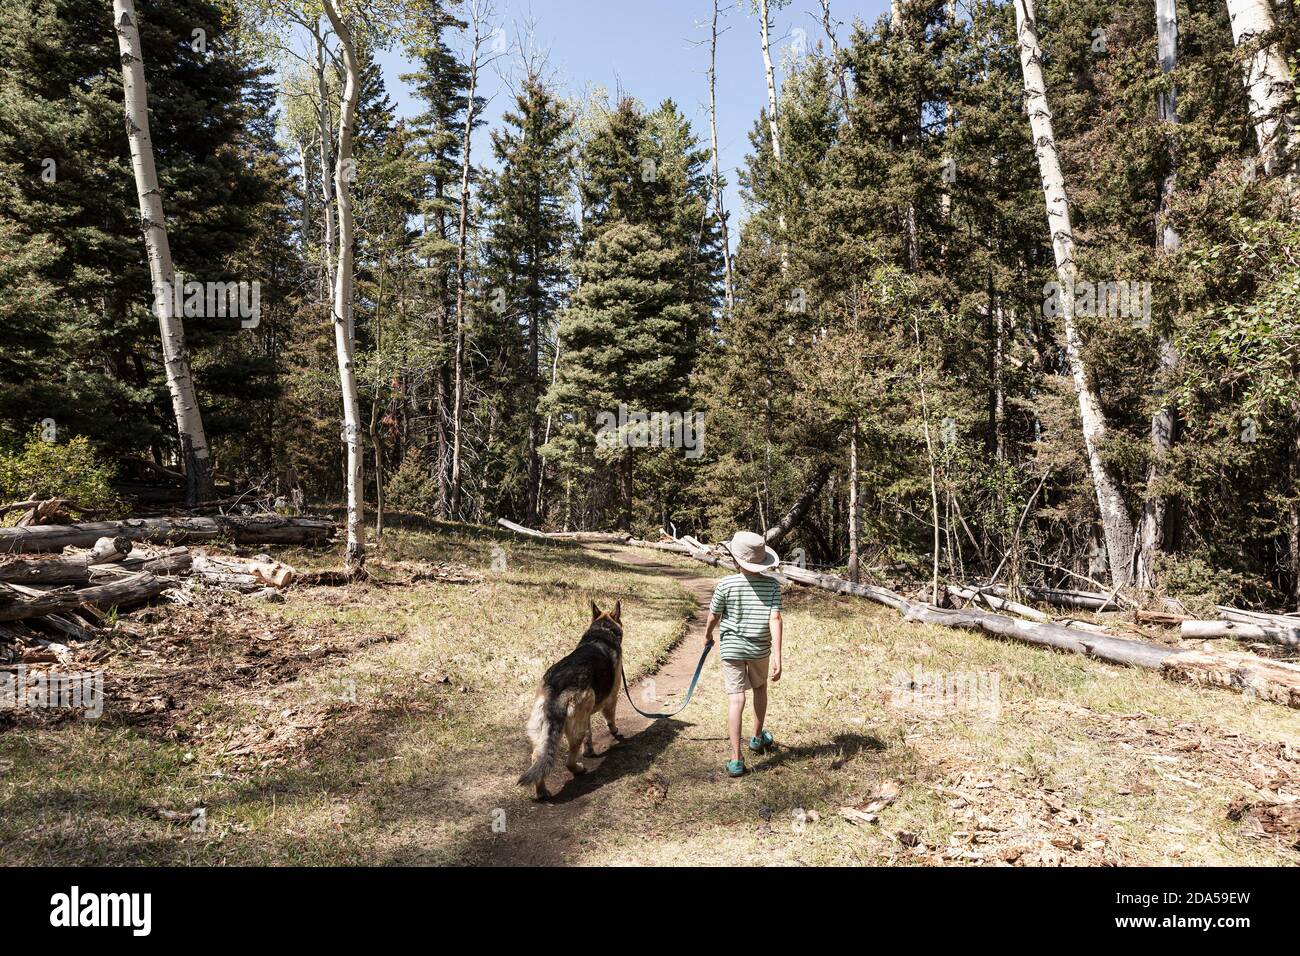 7 year old boy walking his dog in forest of Aspen trees Stock Photo